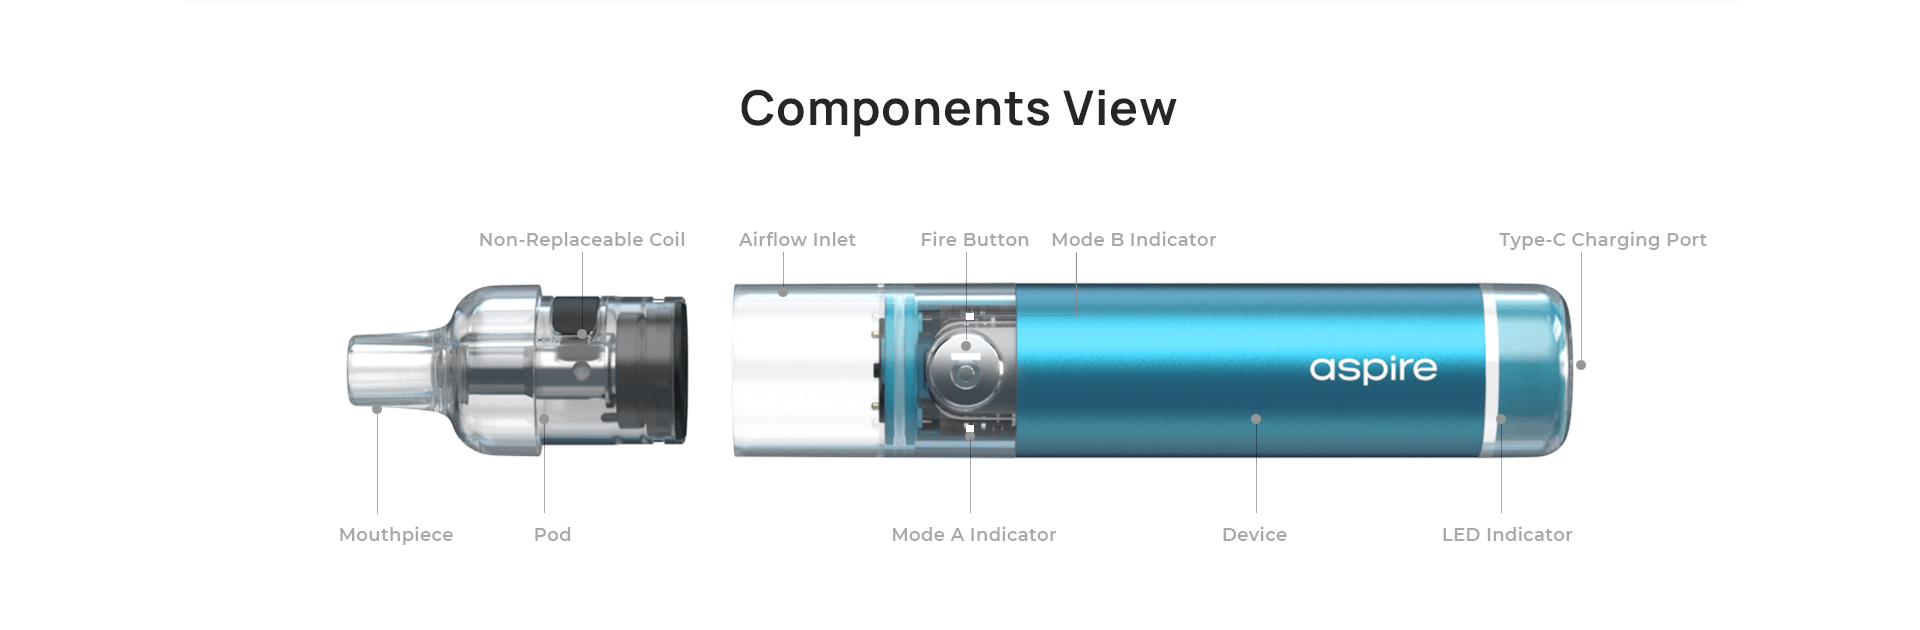 Aspire Cyber G vape kit components view